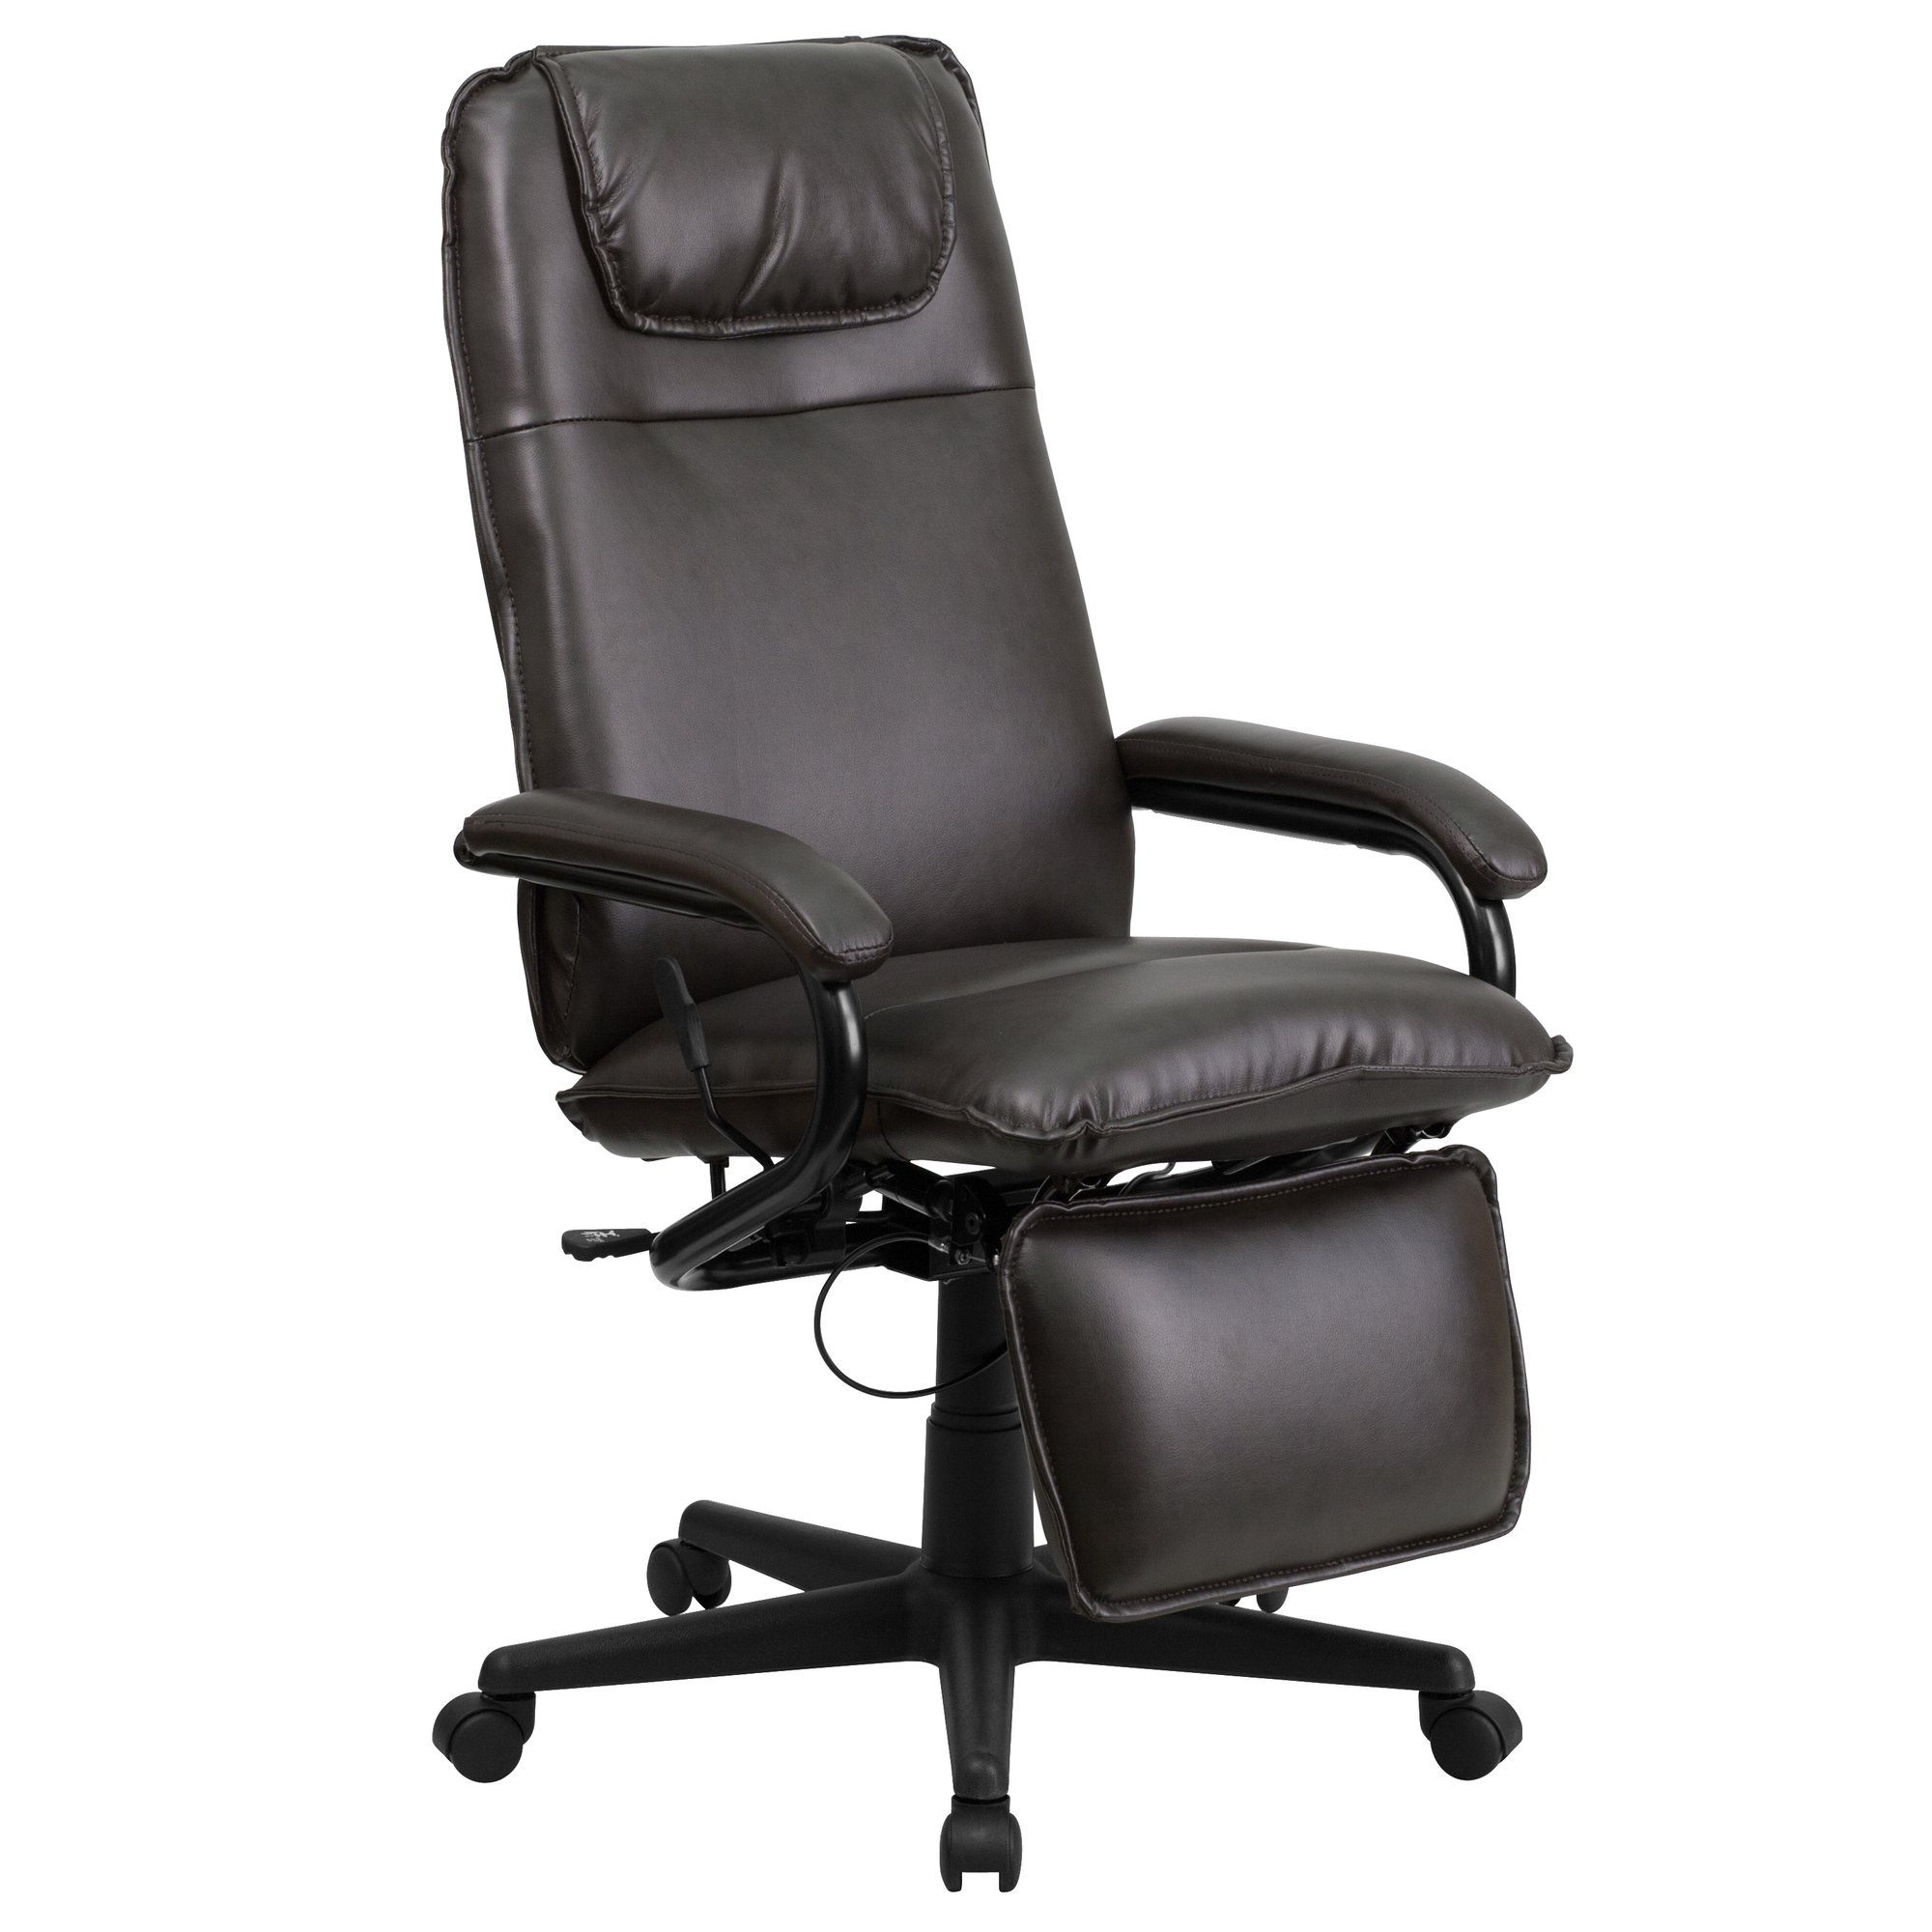 Flash Furniture, High Back Brown LeatherSoft Office Chair with Arms, Primary Color Brown, Included (qty.) 1, Model BT70172BN -  BT-70172-BN-GG